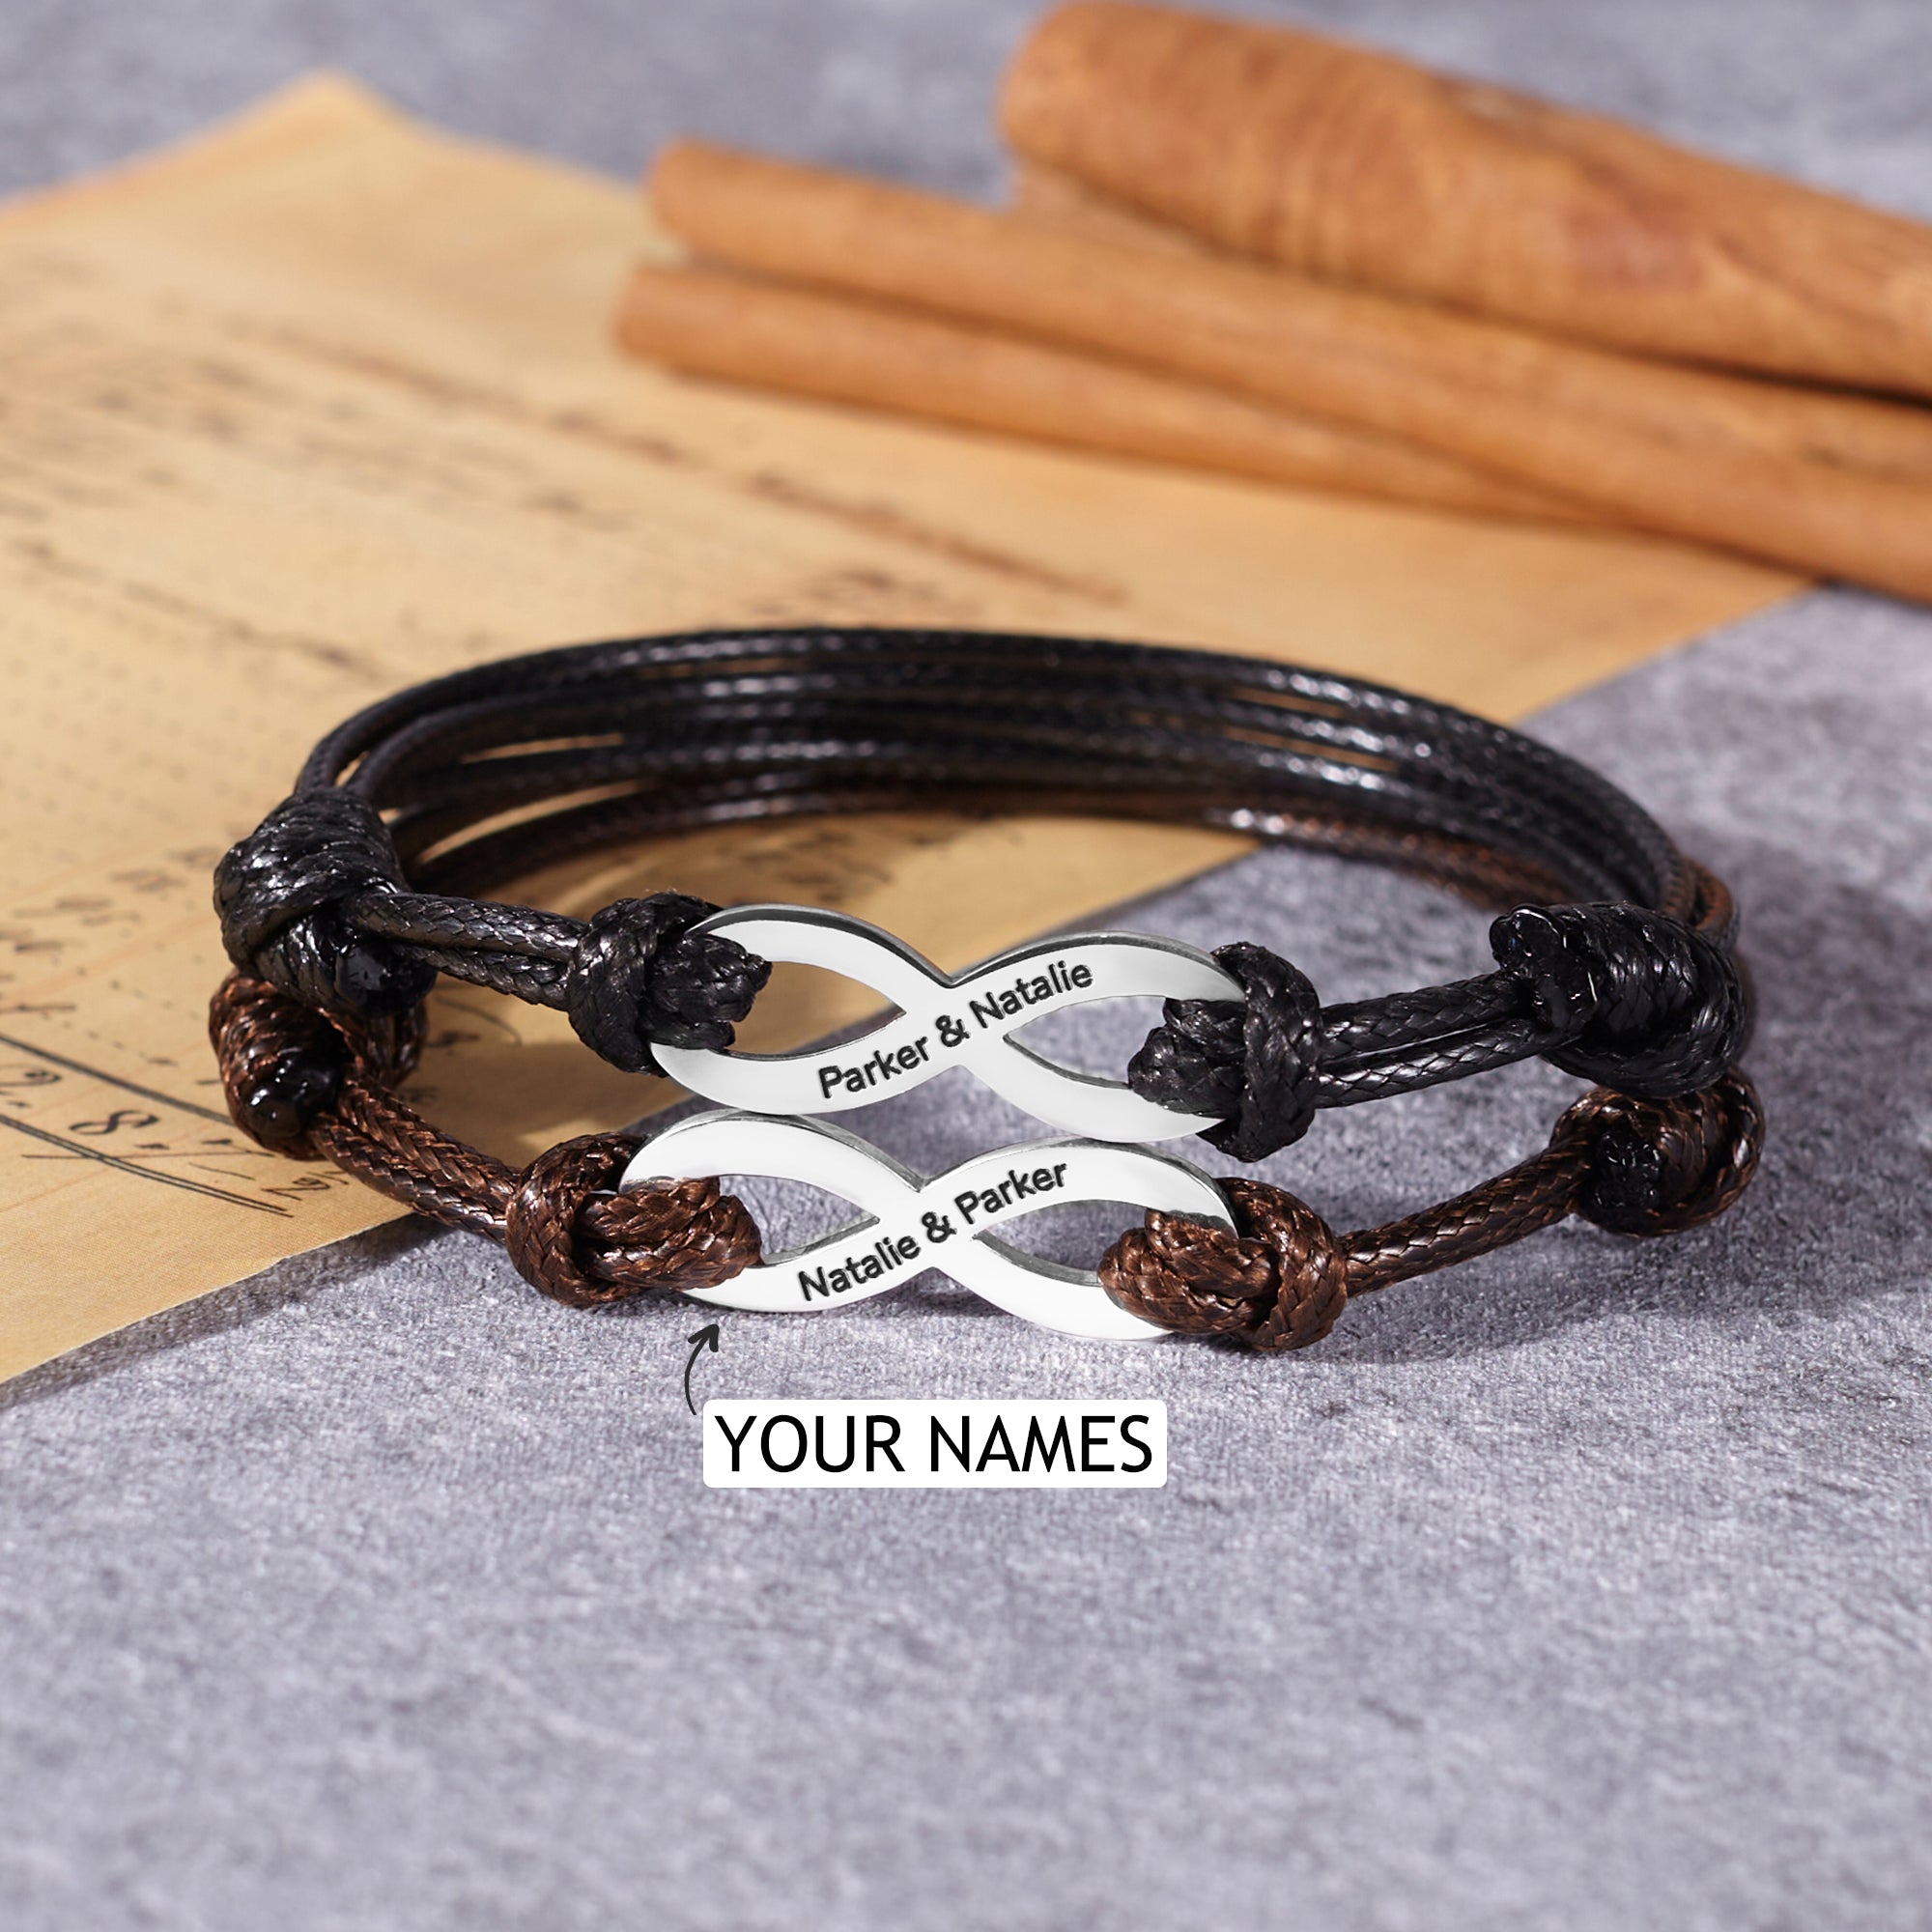 Personalized Sterling Silver Infinity Bracelet for Men - Adjustable Leather Cord with Custom Names or Words - Gift Box Included - Bracelets - Bijou Her -  -  - 